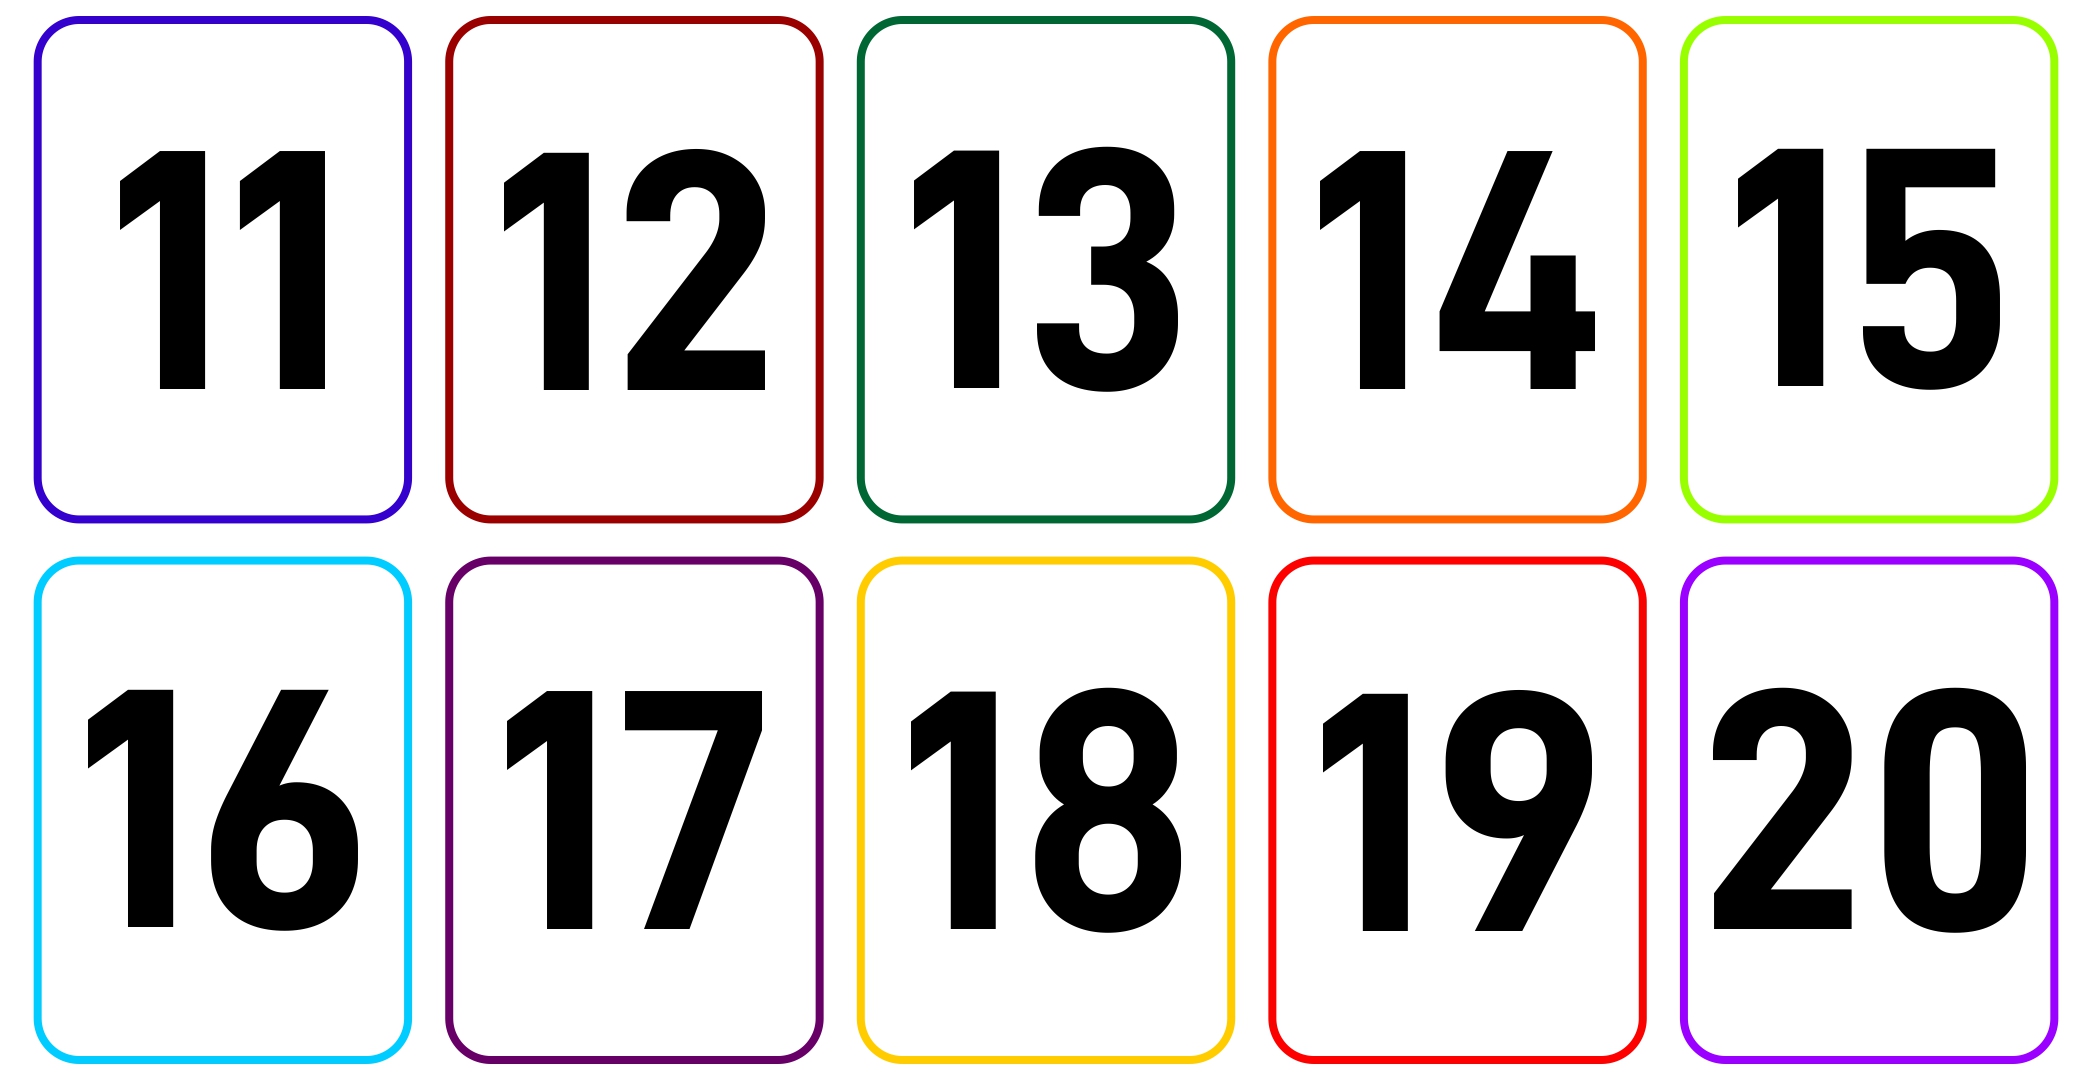 6-best-images-of-large-printable-numbers-11-20-printable-numbers-1-20-printable-numbers-1-20